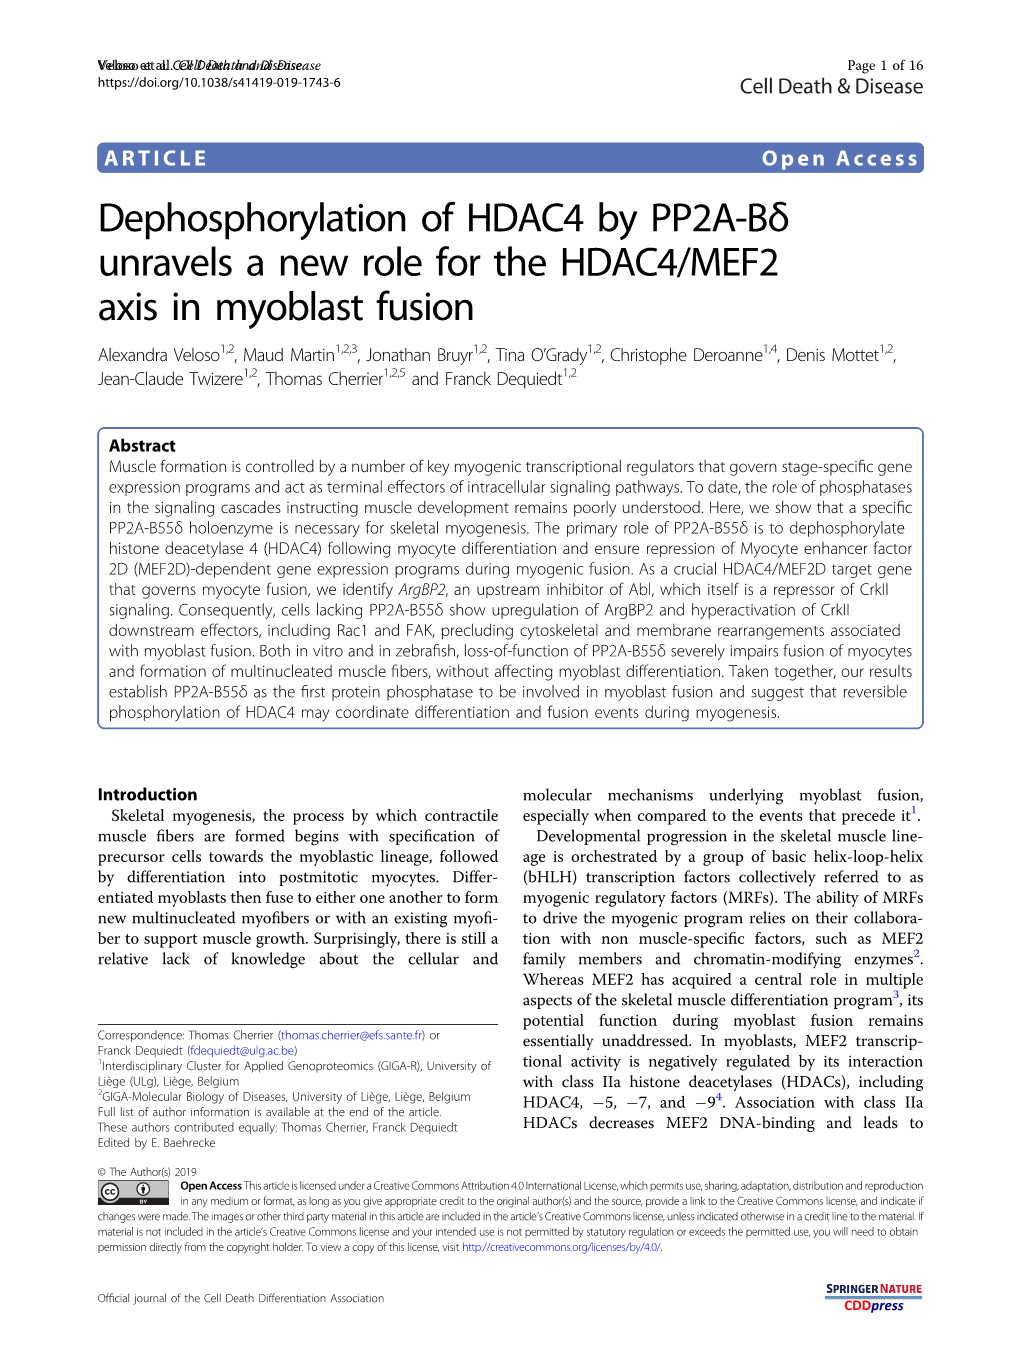 Dephosphorylation of HDAC4 by PP2A-Bδ Unravels a New Role For